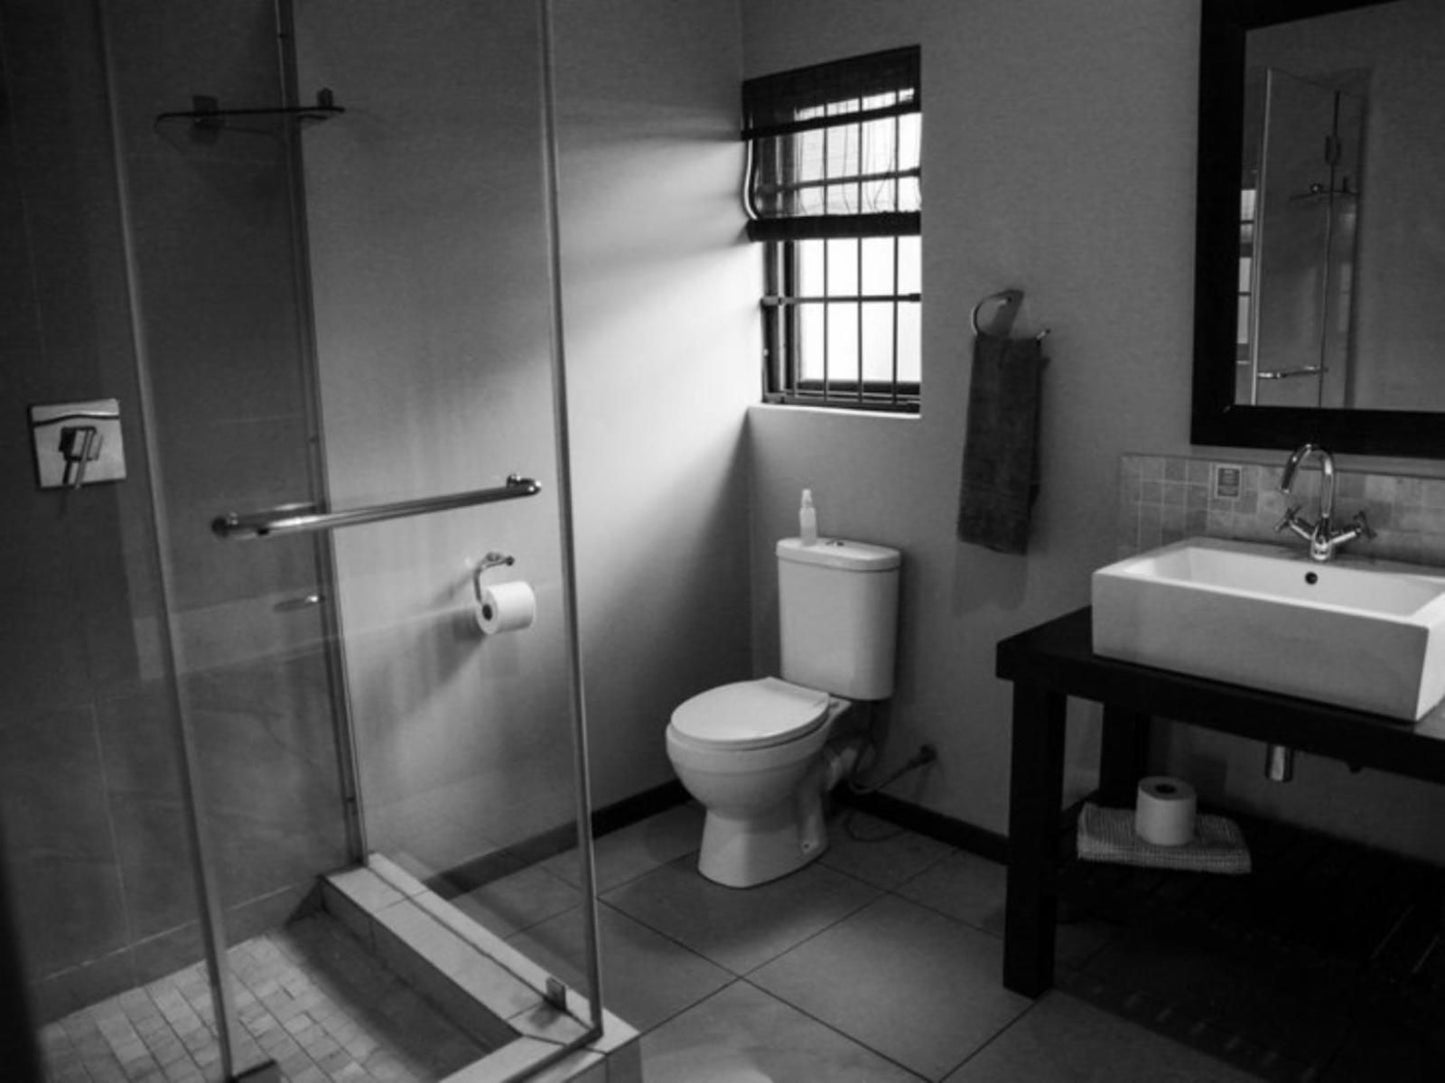 Komodo Guesthouse Rustenburg North West Province South Africa Colorless, Black And White, Bathroom